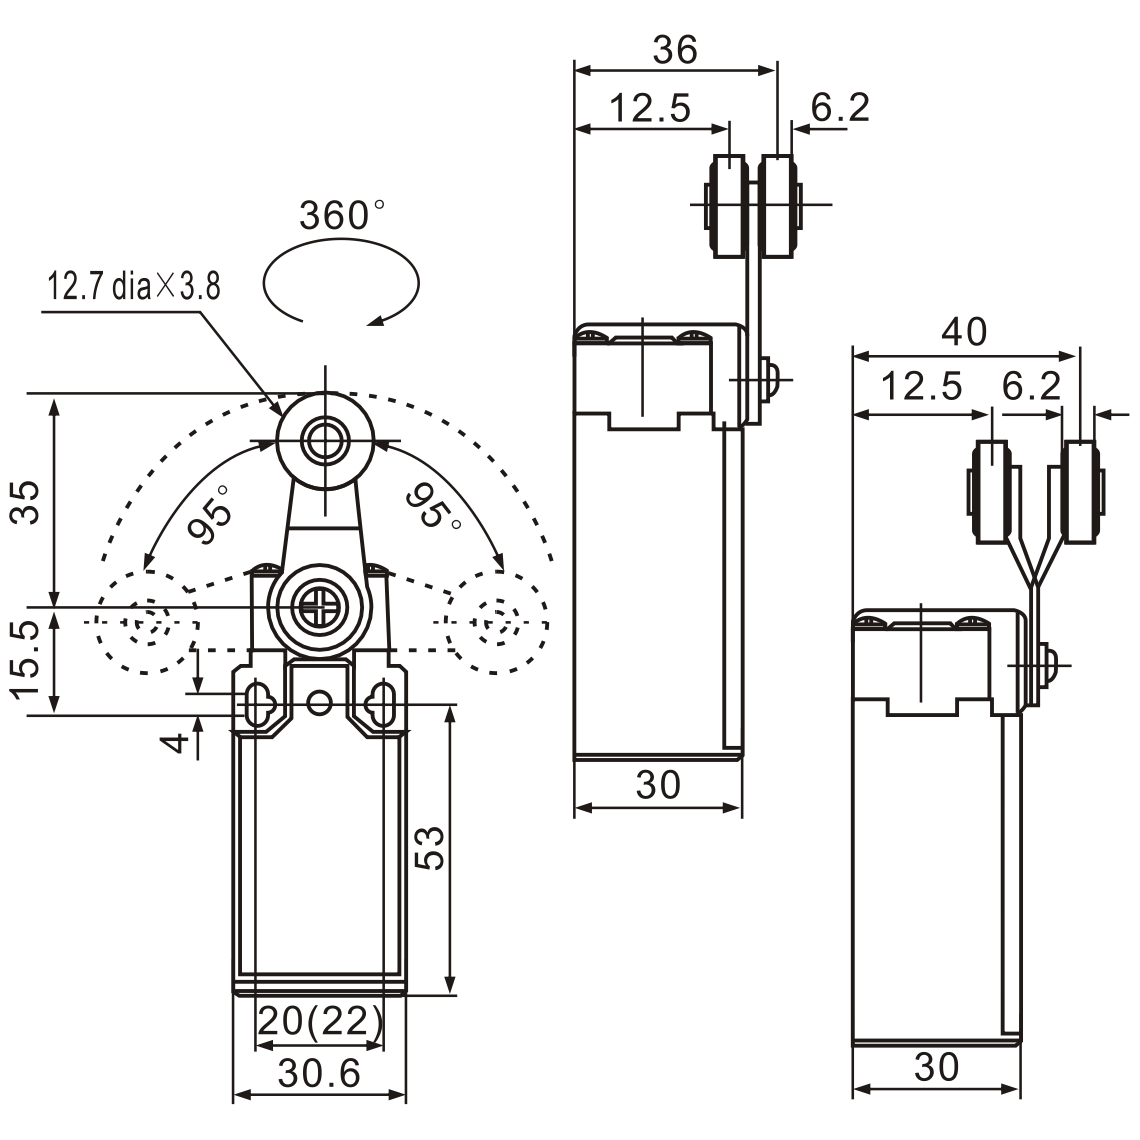 XCK-121 Adjustable Arm with Roller Limit Switch Diagram